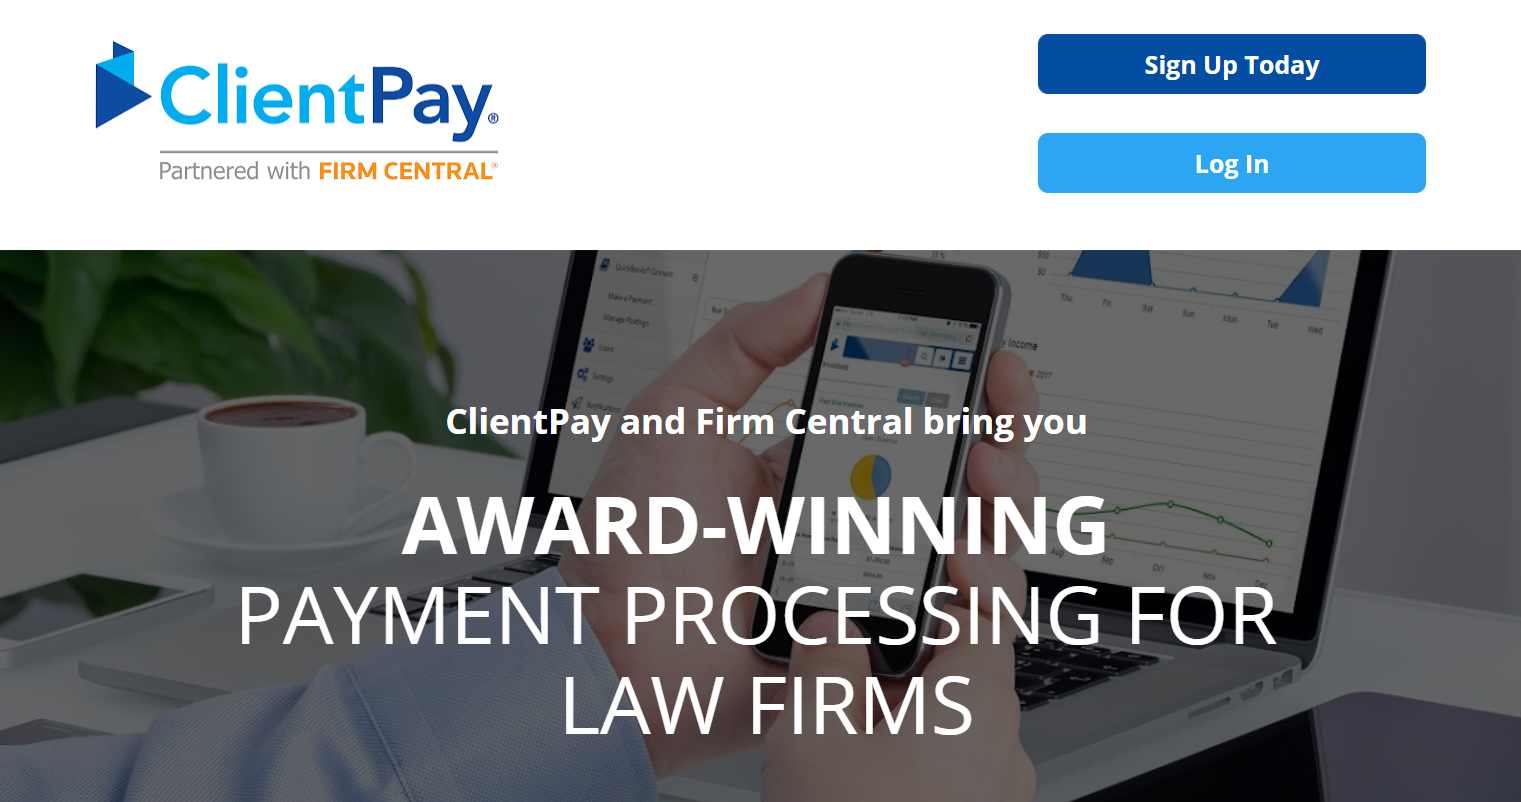 Get Paid Faster Than Ever With New Innovation From Firm Central